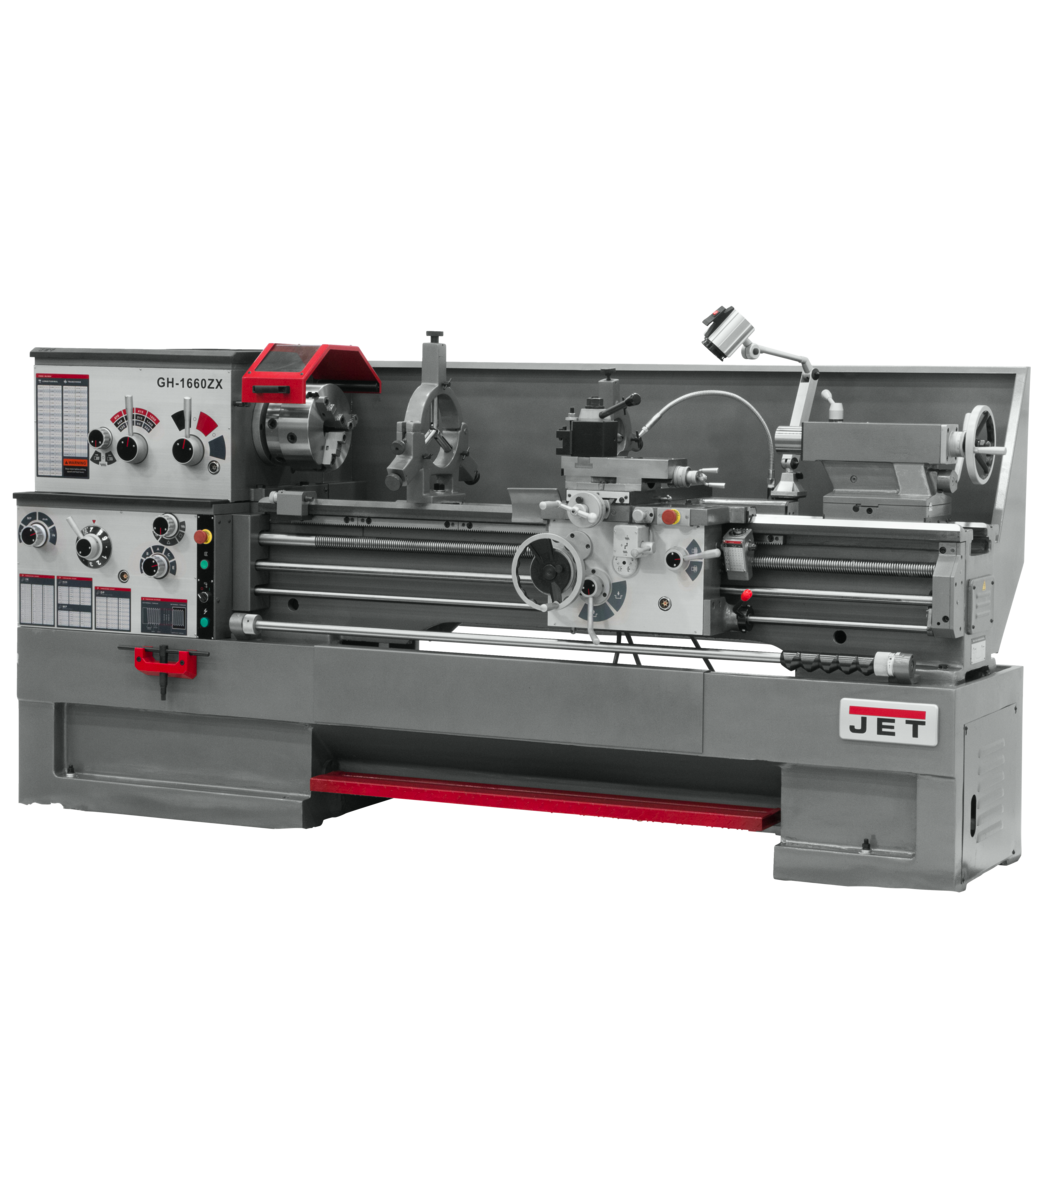 321590, GH-1860ZX , 18" Swing, 60" Between Centers, GH-1860ZX With ACU-RITE 303 DRO installed, Jet, Metalworking, Turning, Lathes